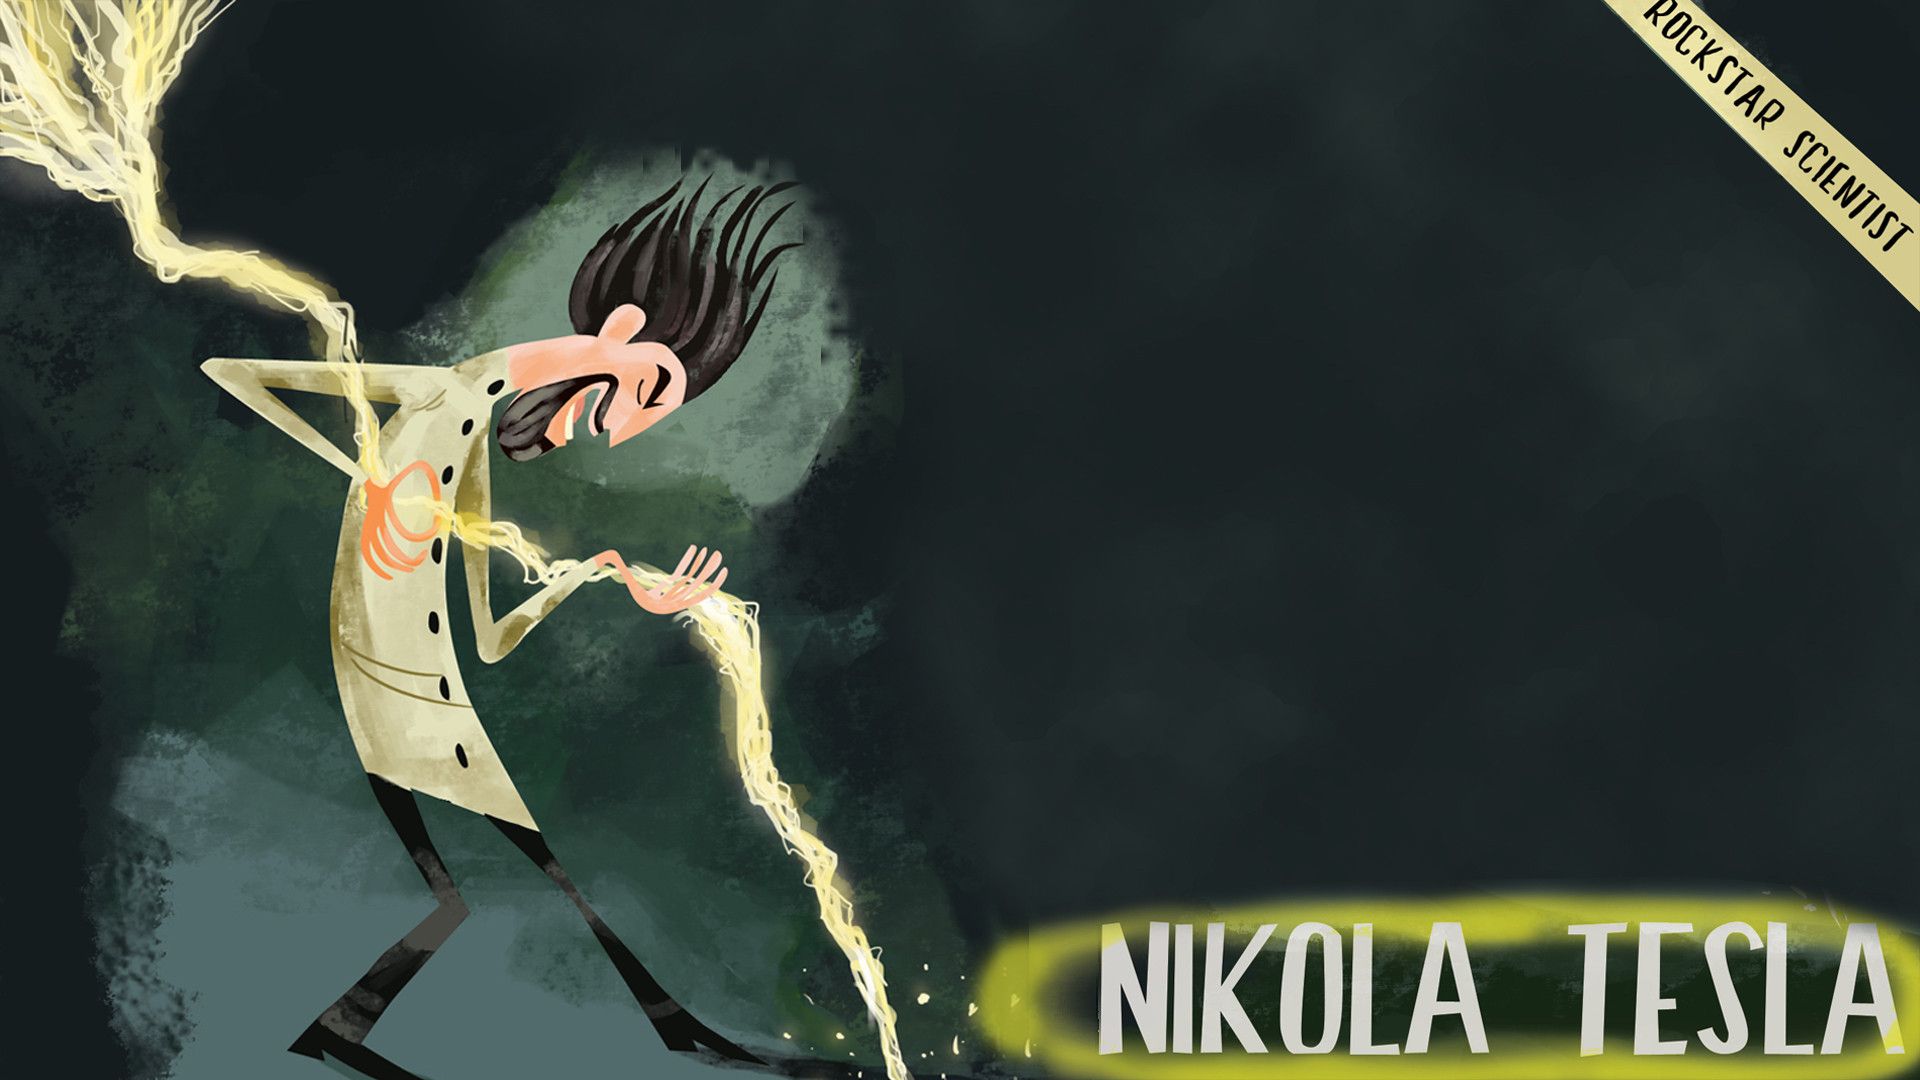 Hi-Res Nikola Tesla: Rockstar Scientist poster from Cloudy With a ...